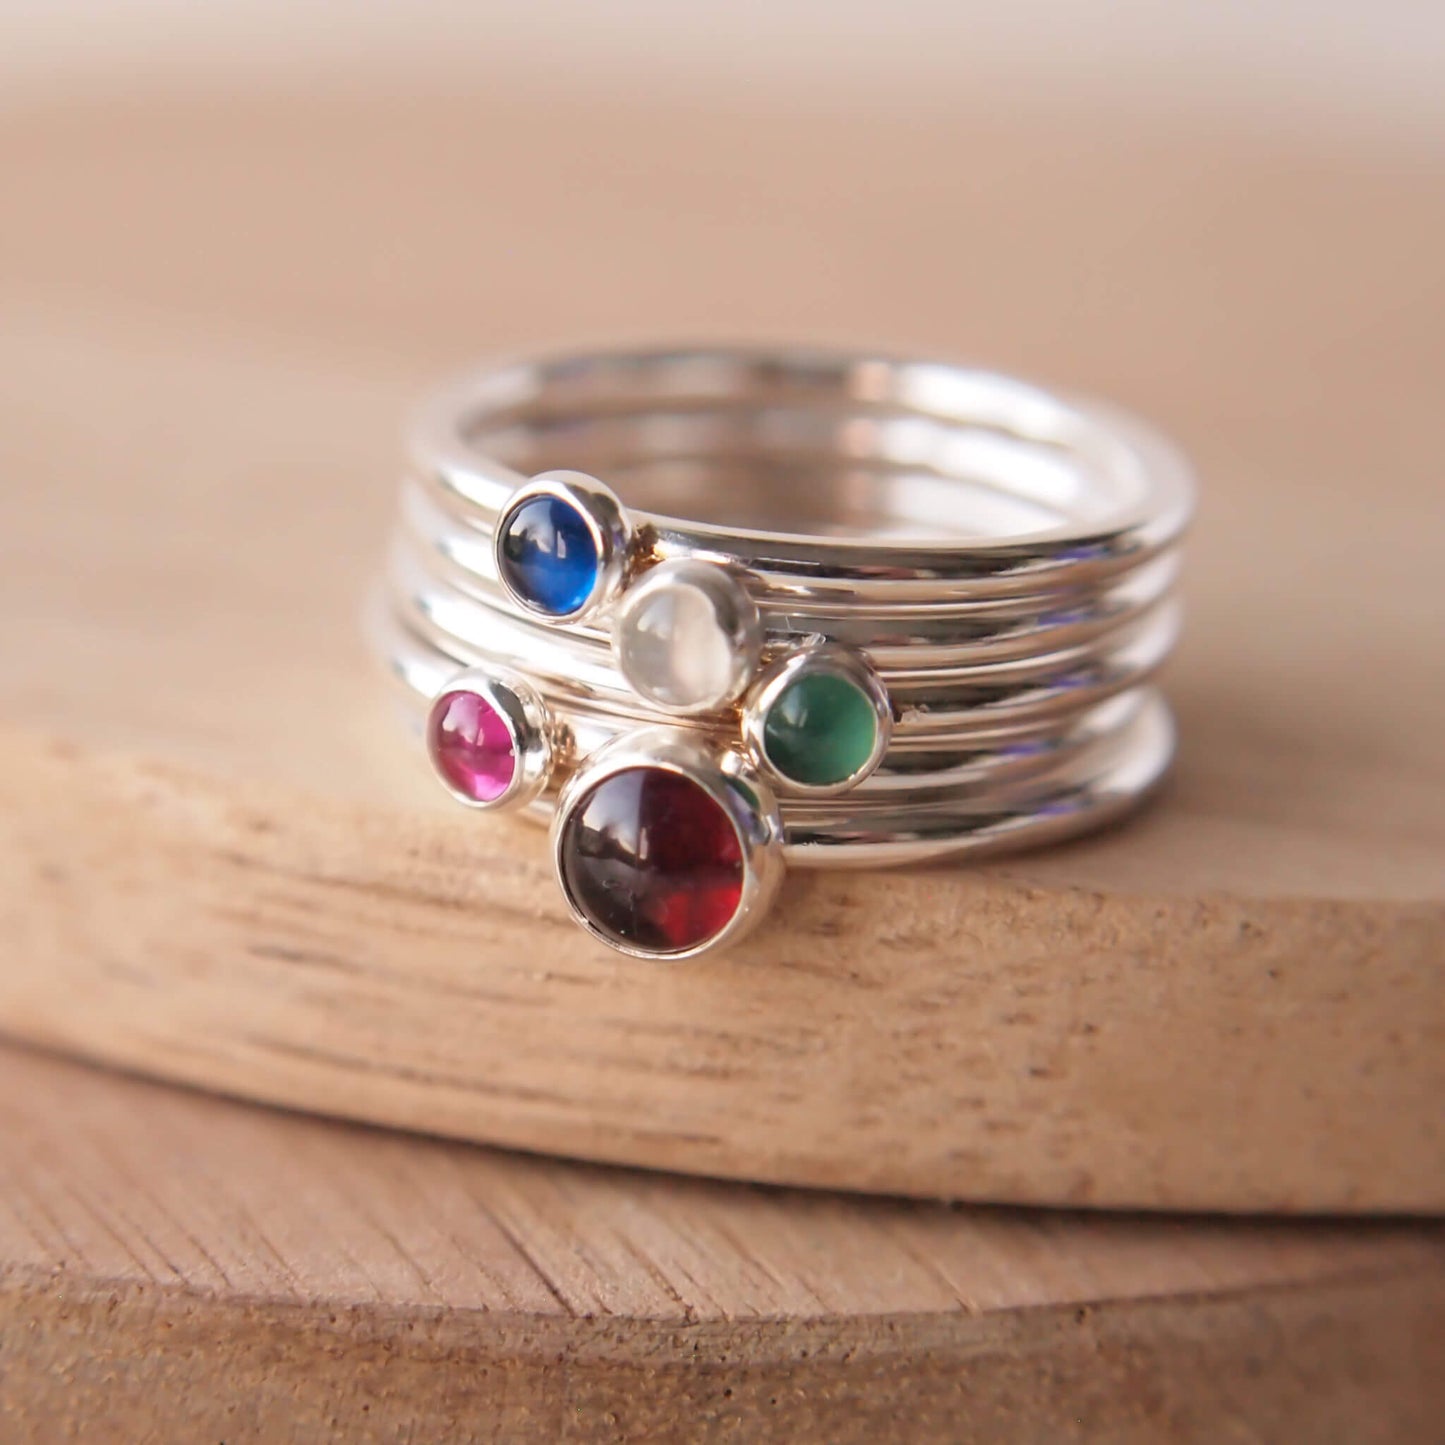 Family birthstone ring set with Garnet, Green agate, Lab Ruby, Lab Sapphire and Moonstone to mark January,May,June,July and September birthdays. Handmade by maram jewellery in Edinburgh